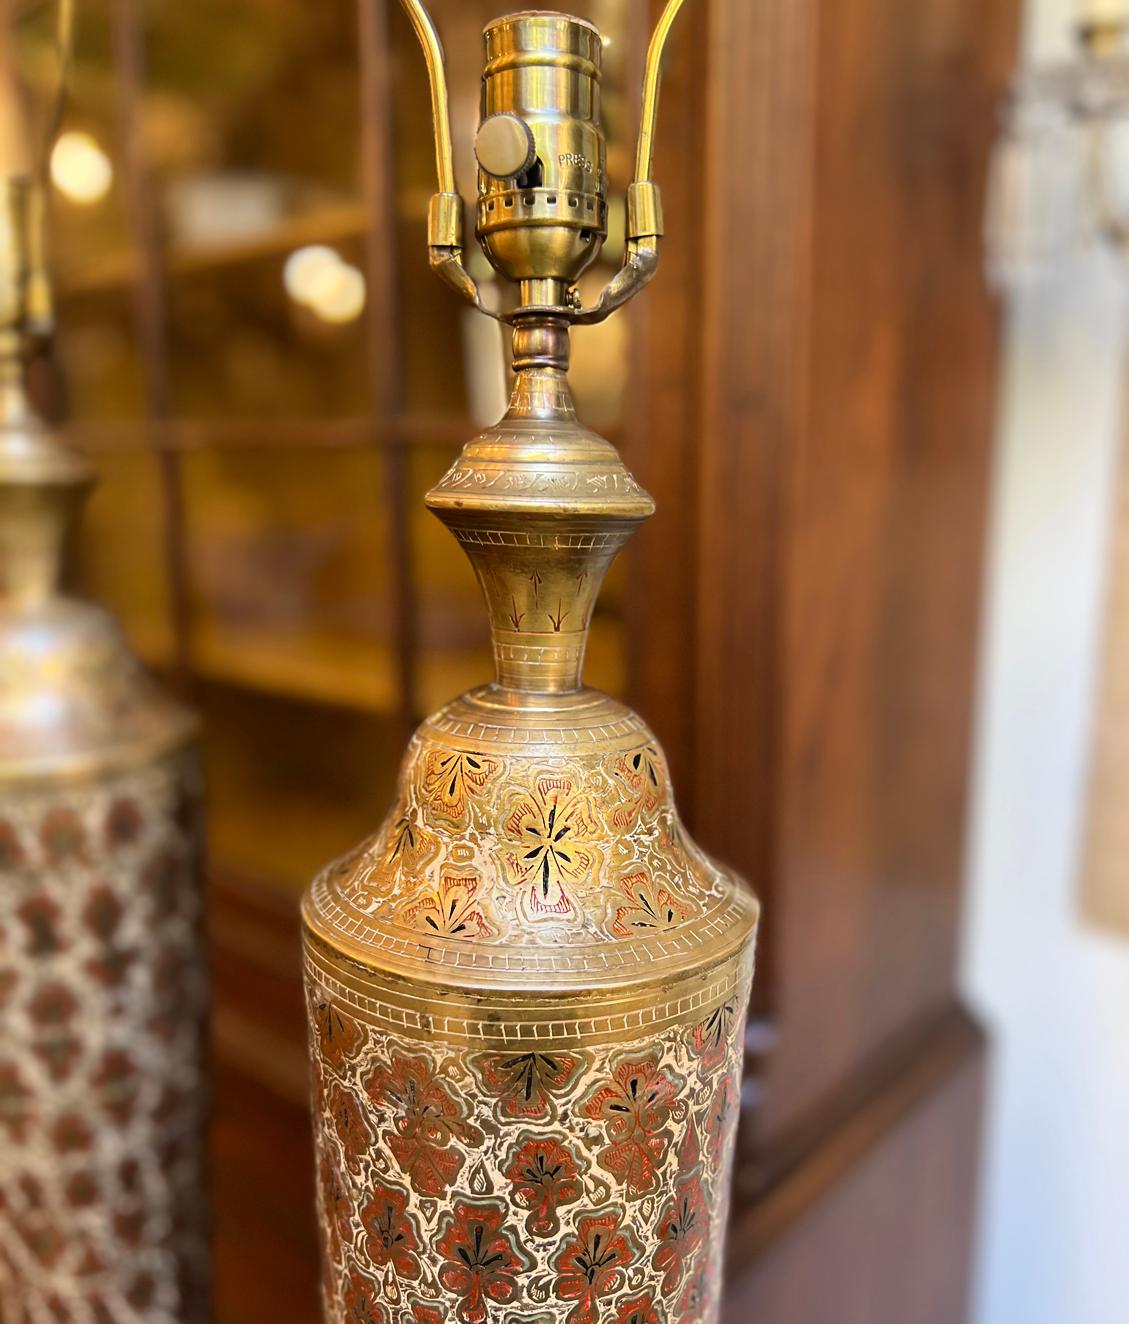 Pair of circa 1920's Turkish table lamps with original patina.

Measurements:
Height of body: 47